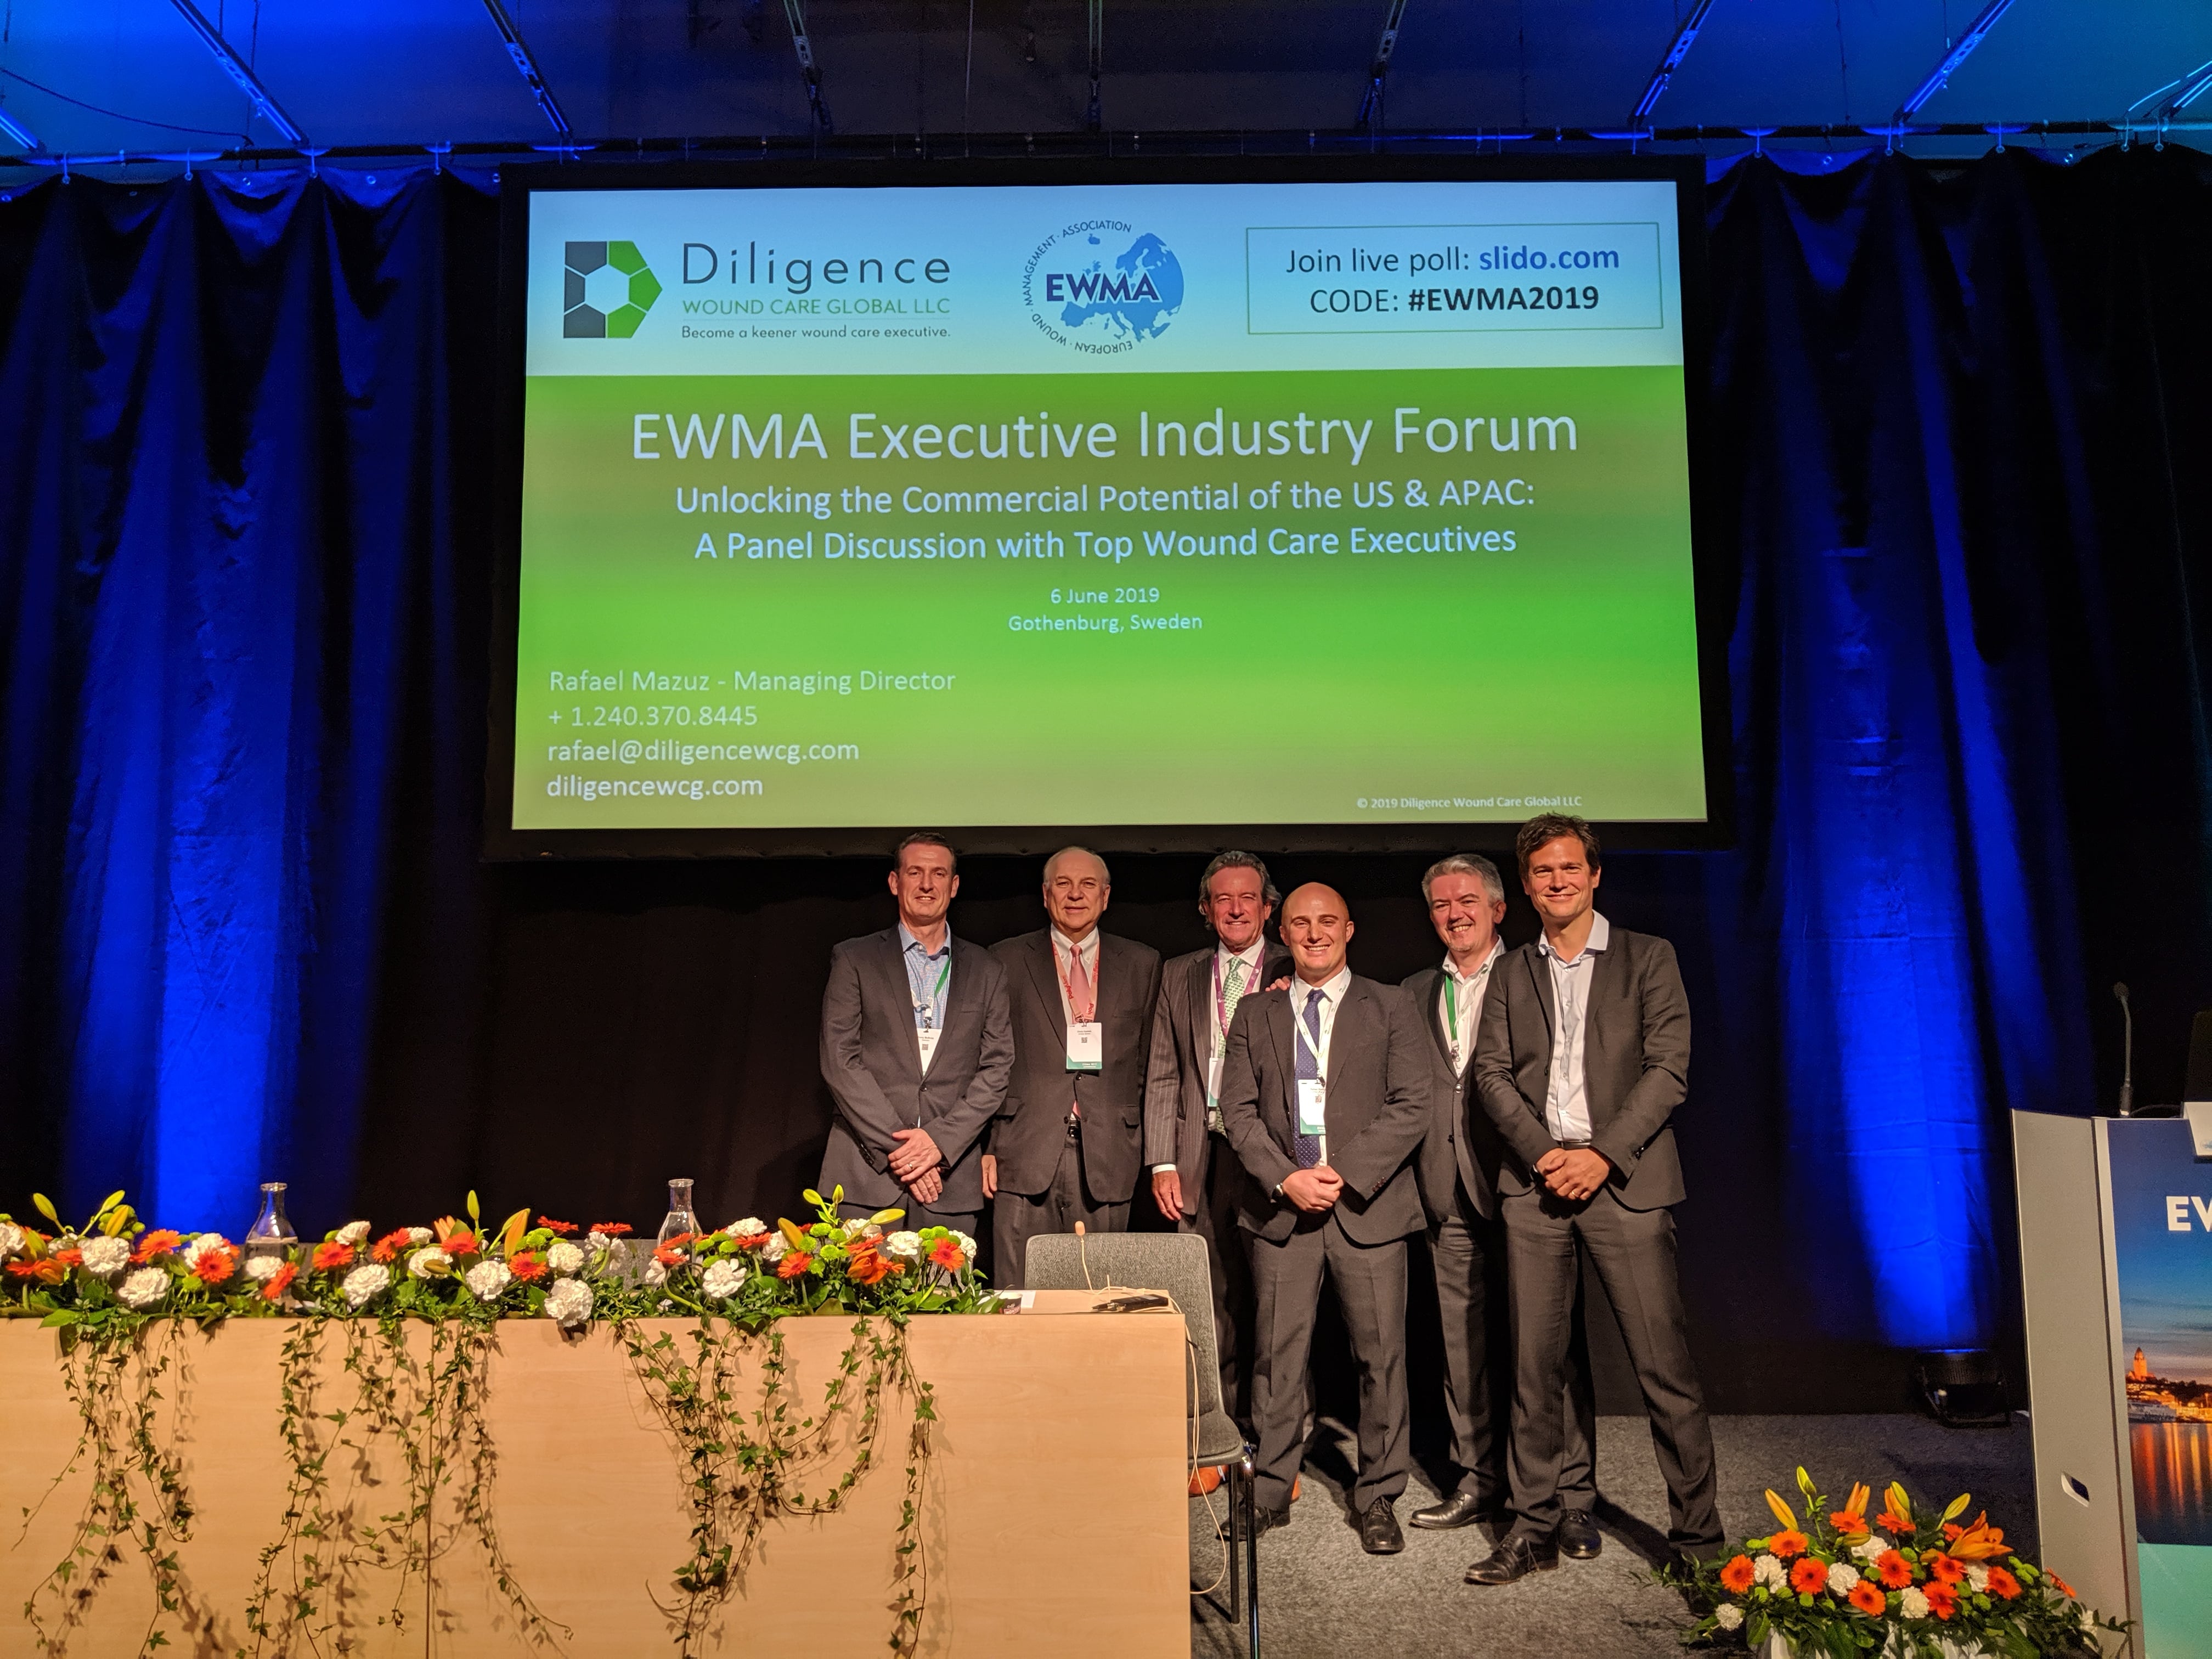 EWMA 2019 and Executive Industry Forum: Unlocking the Commercial Potential of the US & Asia